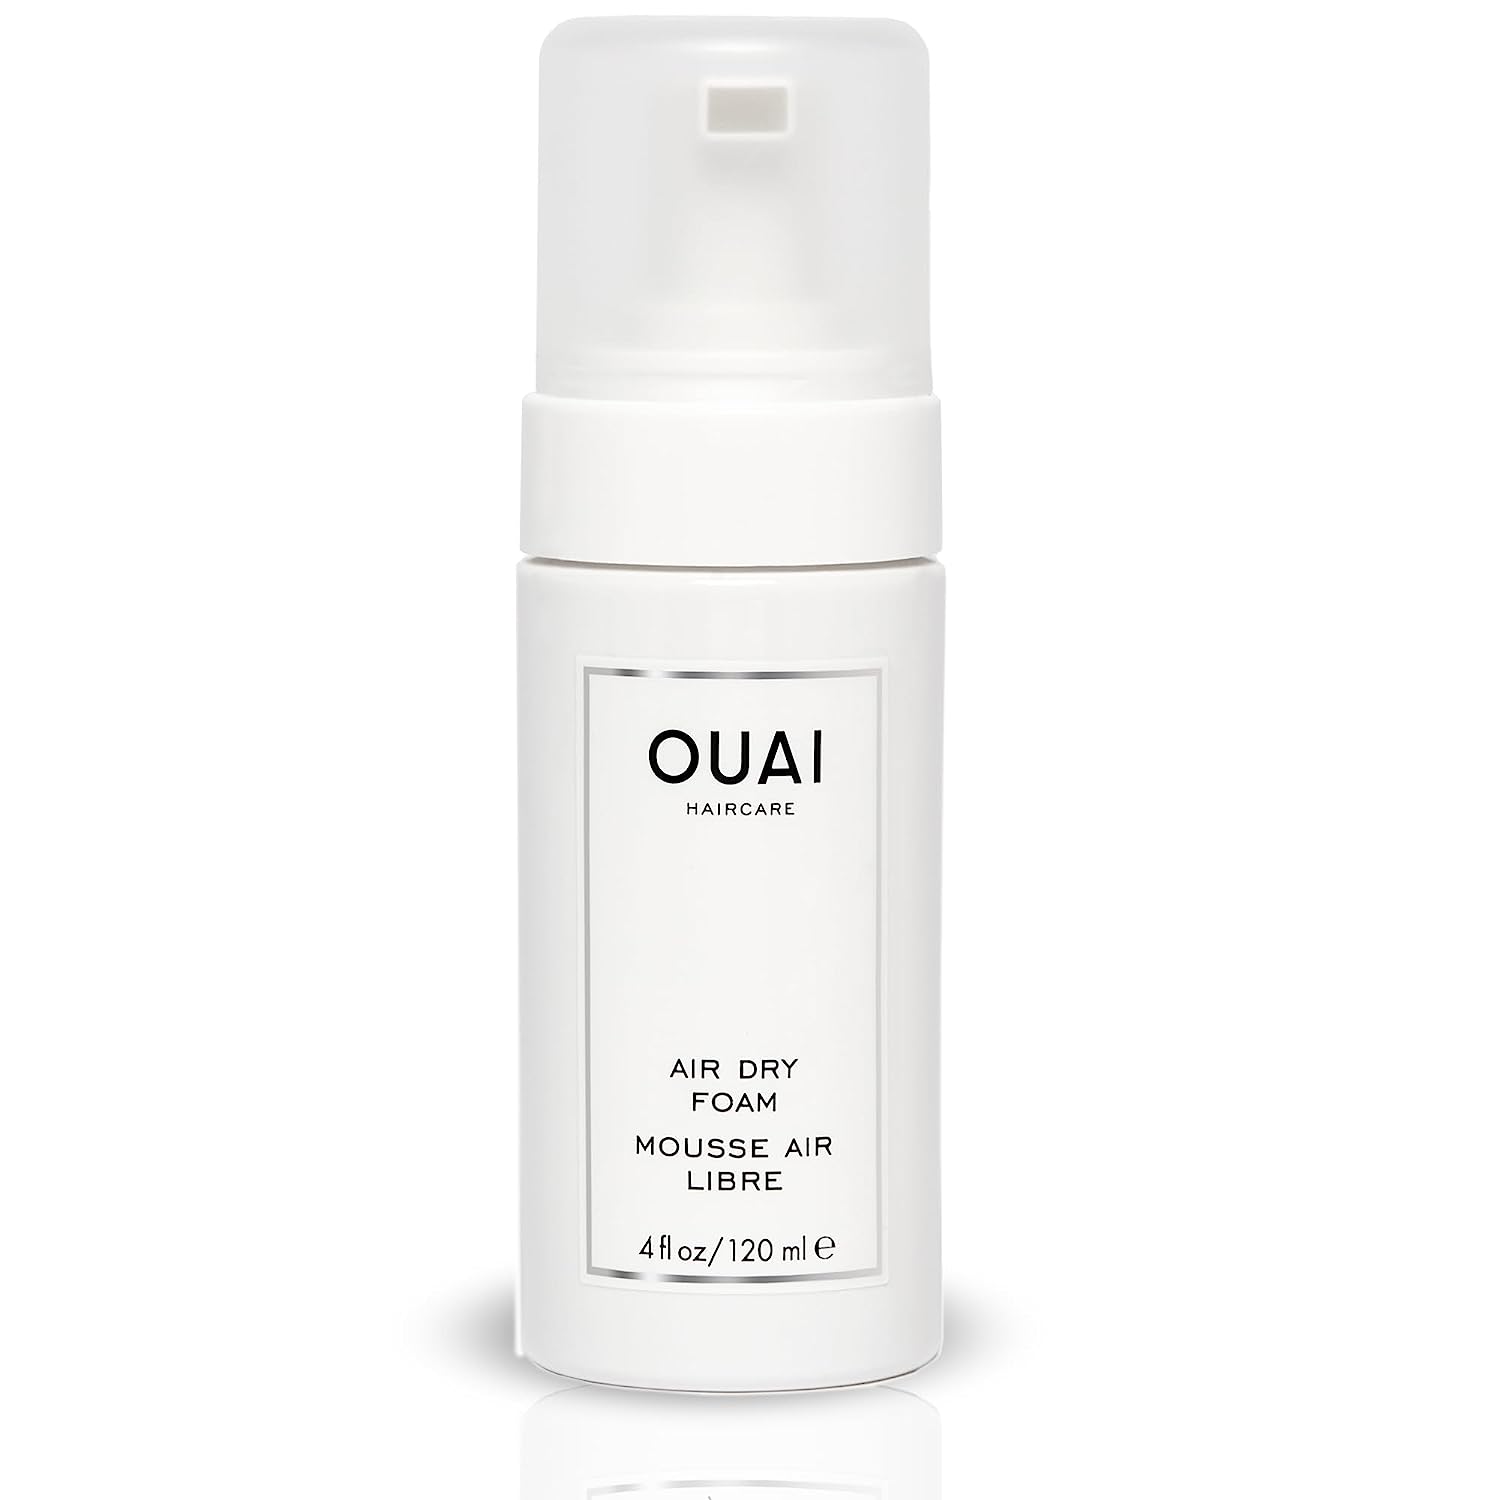 OUAI Air Dry Foam. Wash and Wear Mousse for Perfect [...]